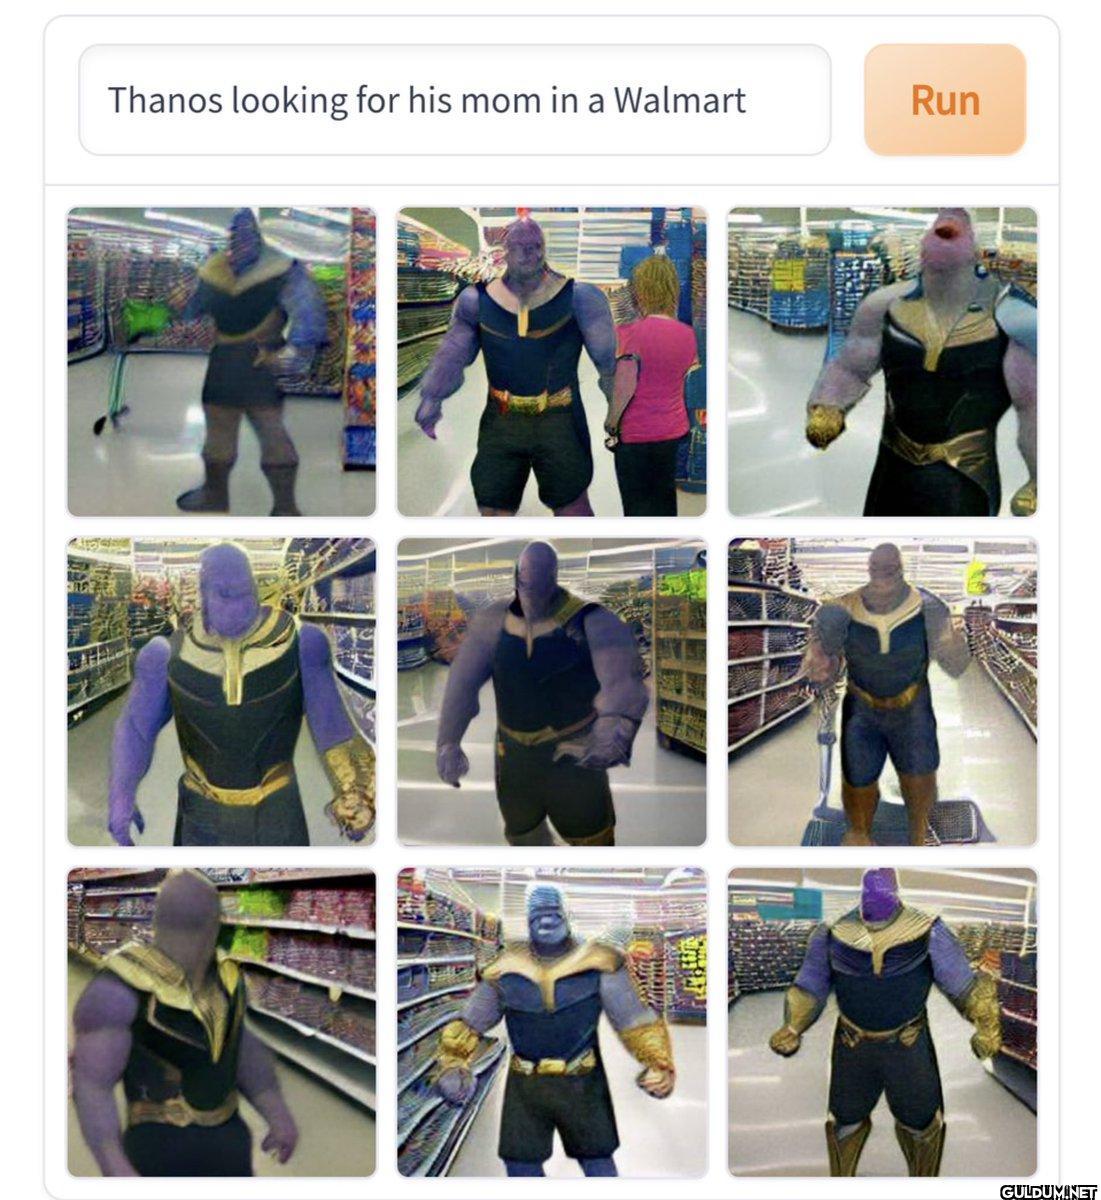 Thanos looking for his mom...